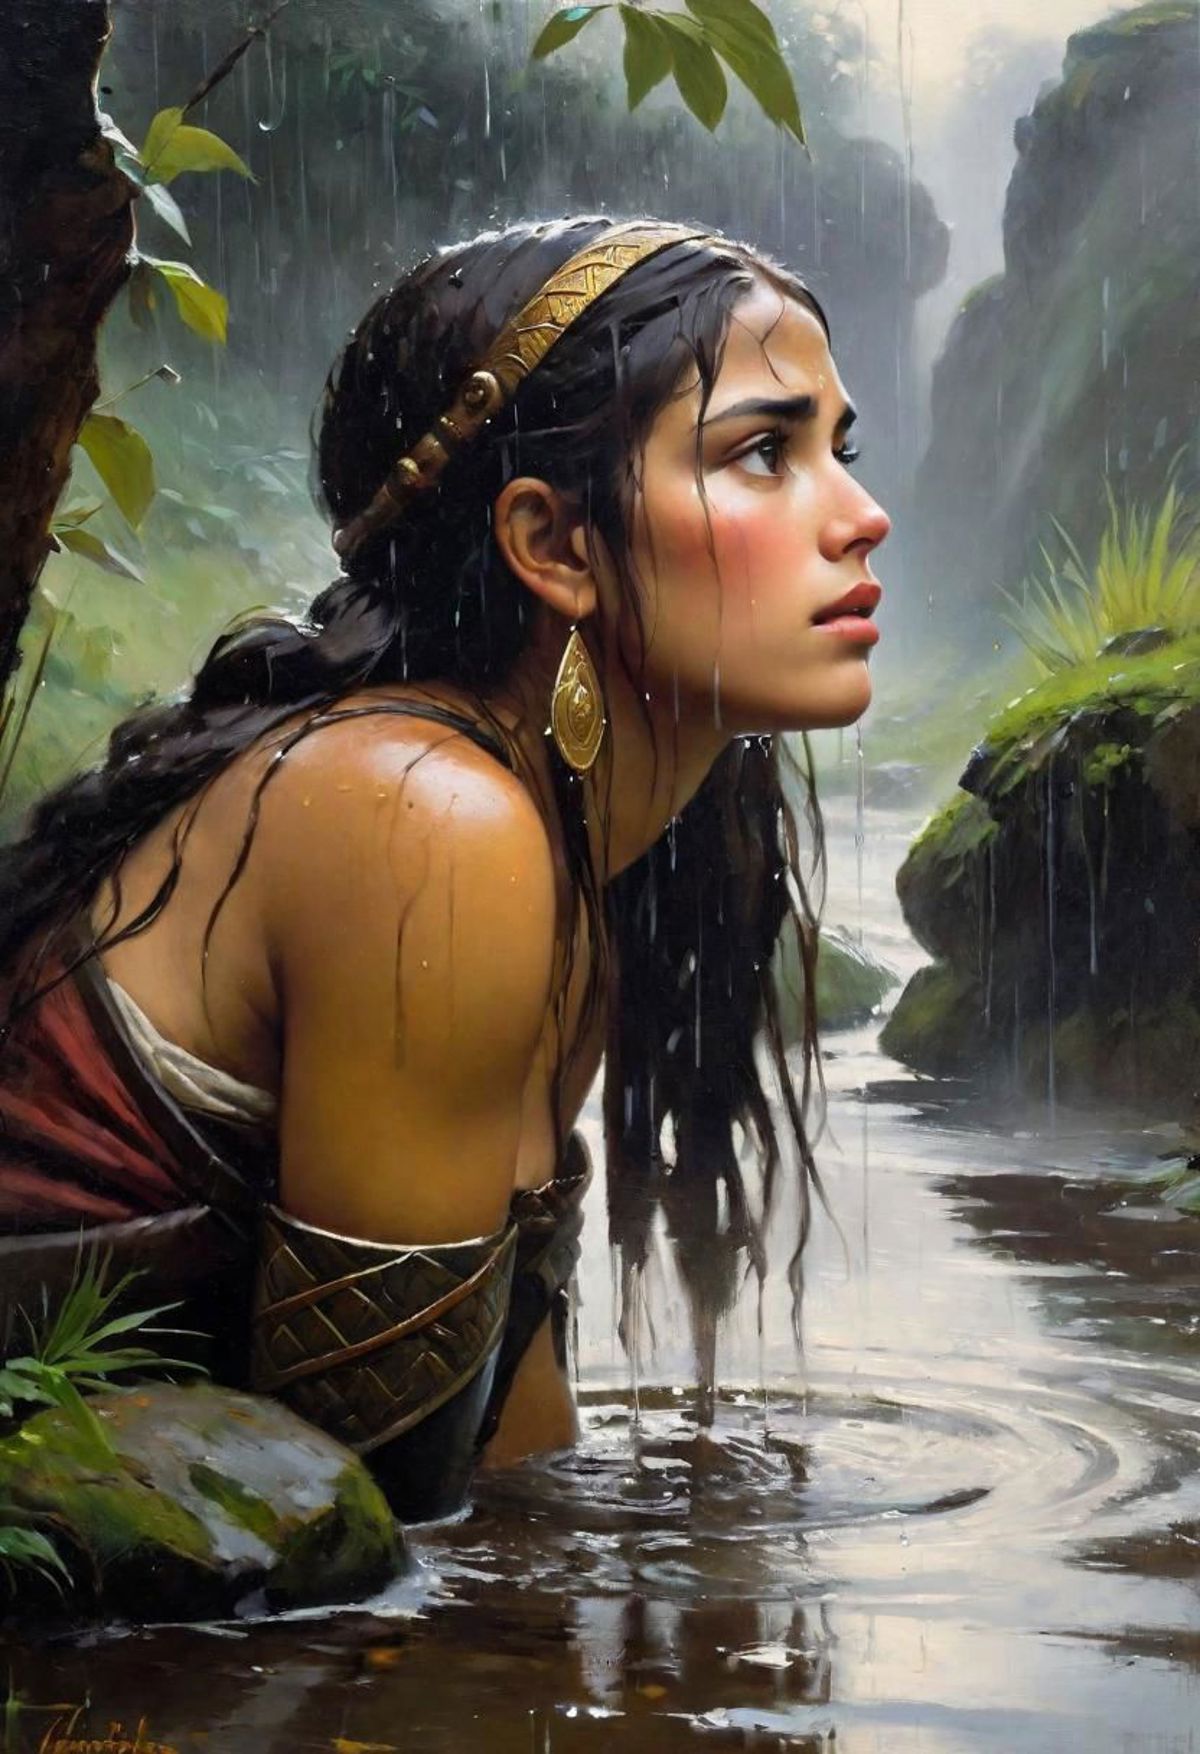 A painting of a woman with long hair and a golden headband, looking down at water.